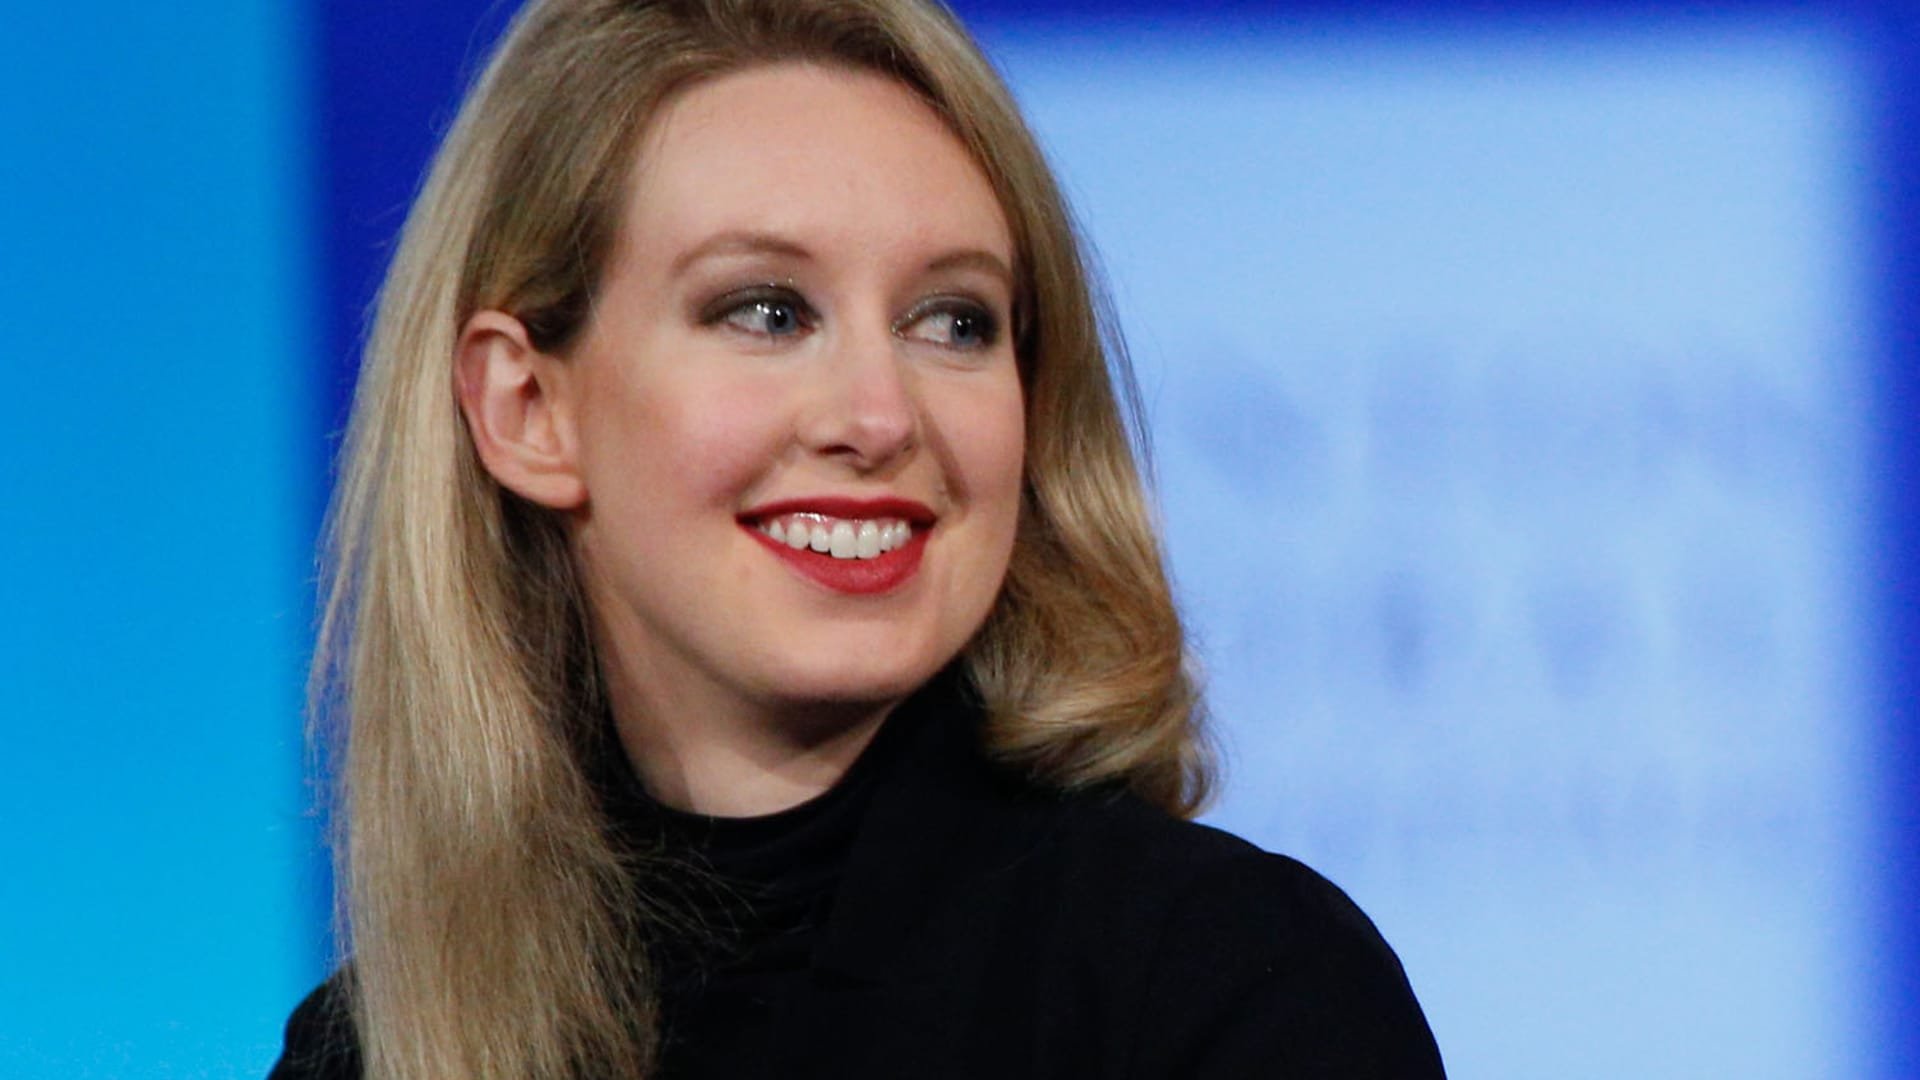 Theranos hired its president's dermatologist as lab director in 2014, testimony shows